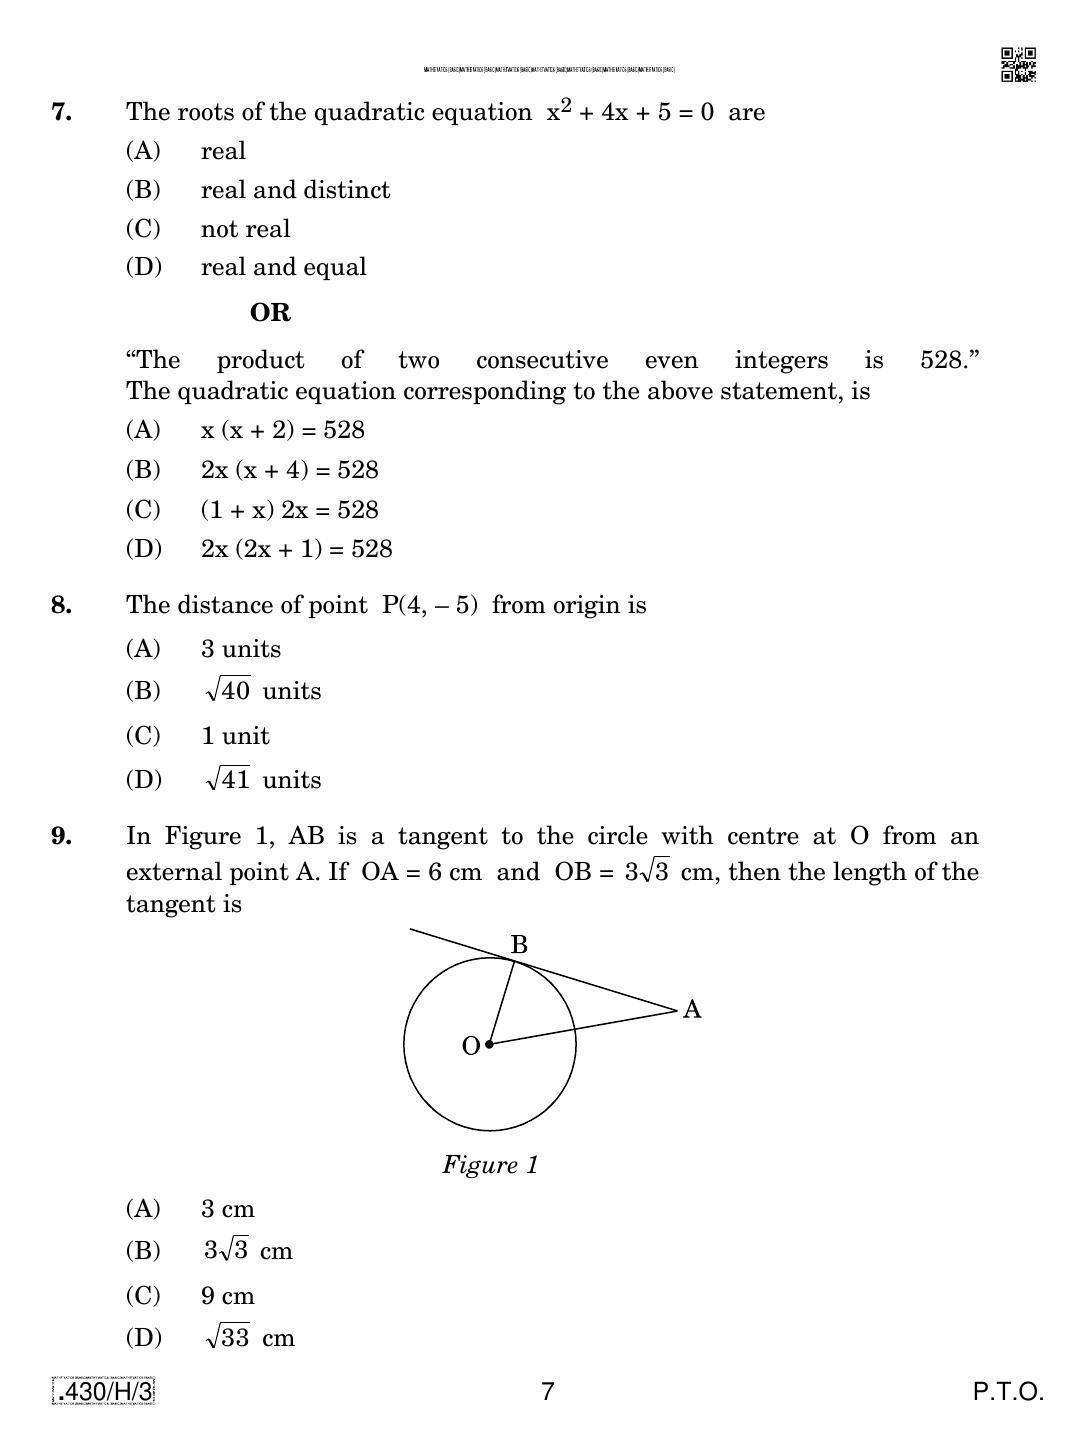 CBSE Class 10 430-C-3 - Maths (Basic) 2020 Compartment Question Paper - Page 7